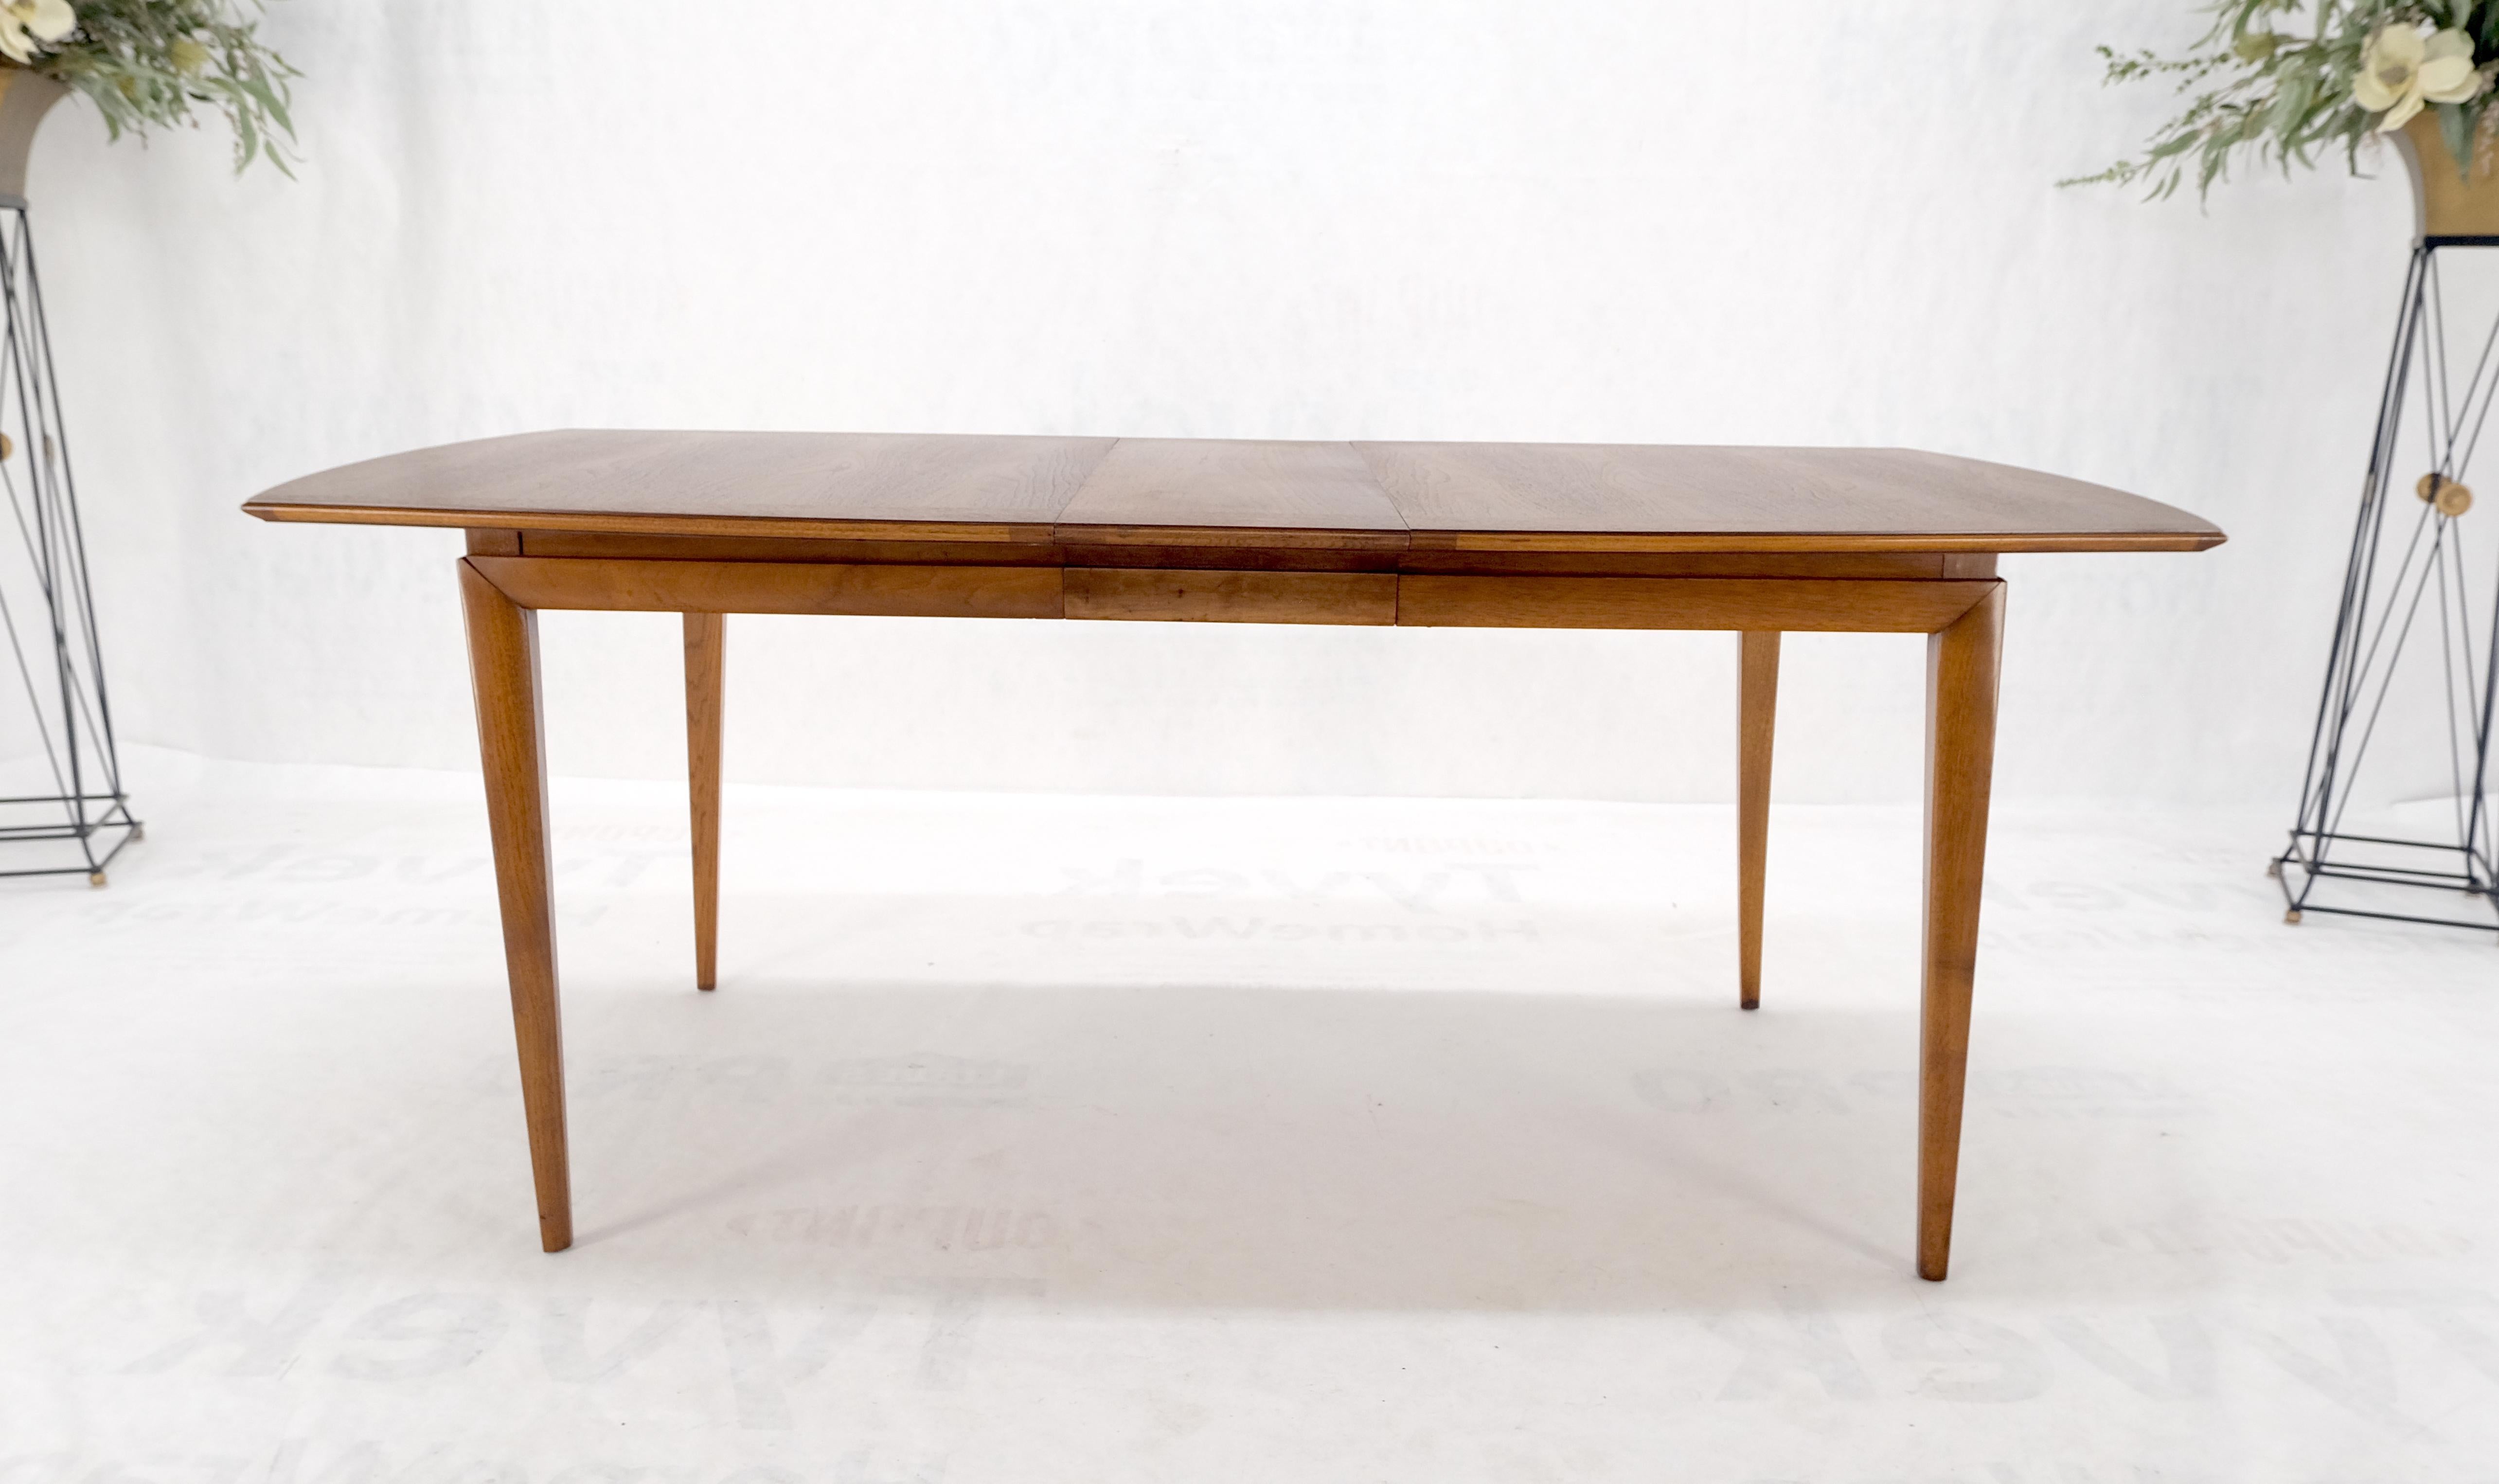 20th Century American Walnut Mid Century Modern Boat Shape Dining Table 1 Extension Leaf MINT For Sale